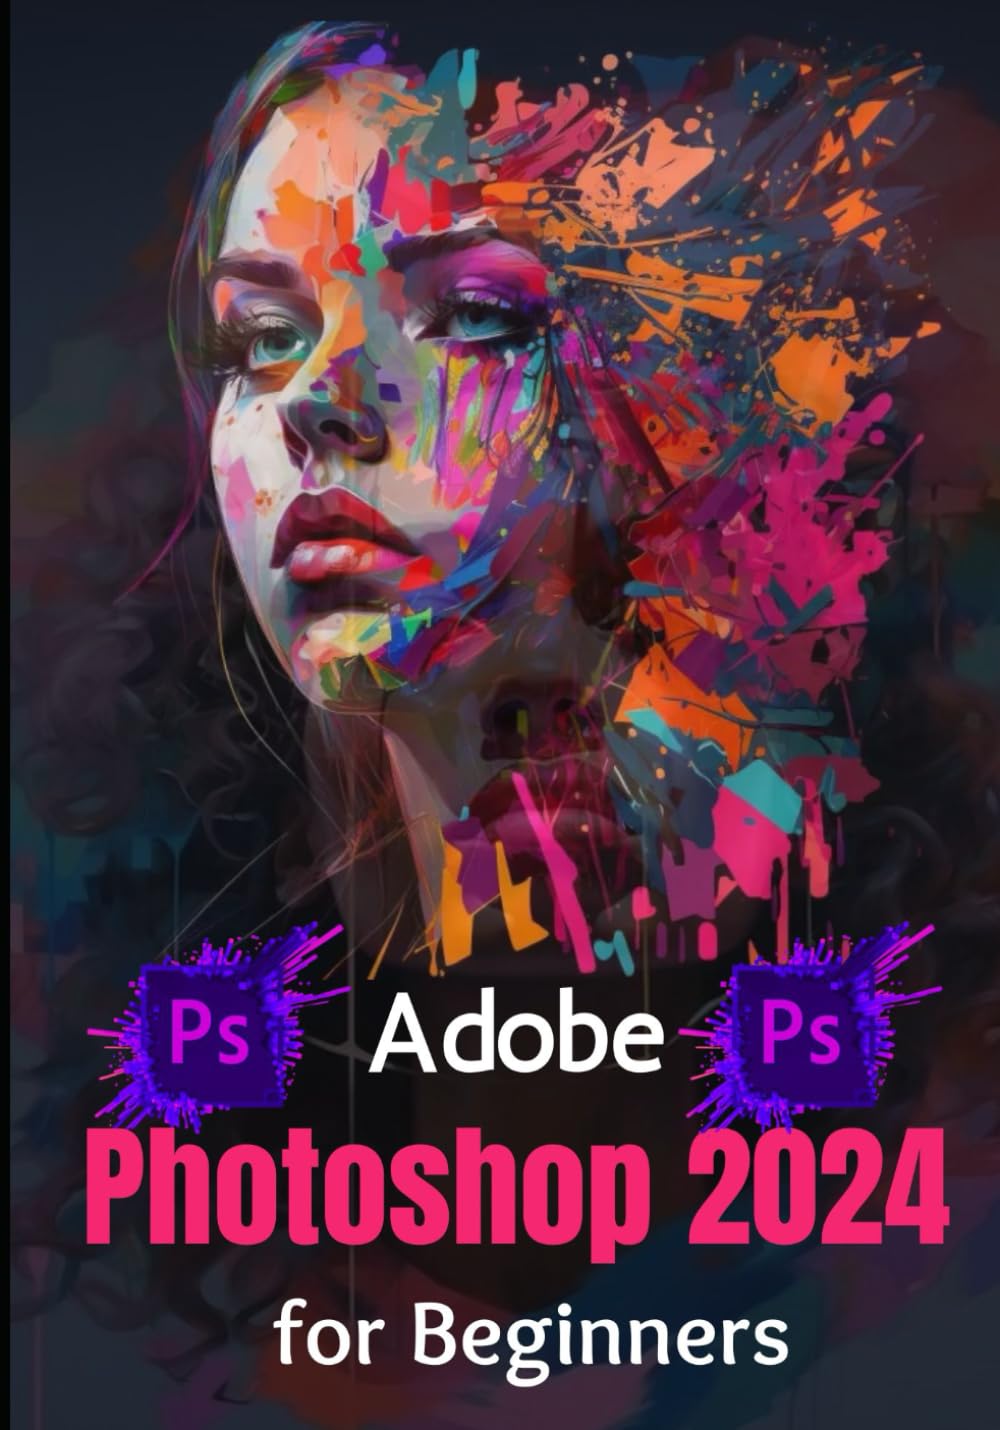 Adobe Photoshop 2024 for Beginners: Complete Beginner to Expert Step-by-Step Practical Guide to Master the Tools and Techniques in Photoshop for Professional Graphic Creation & Manipulation